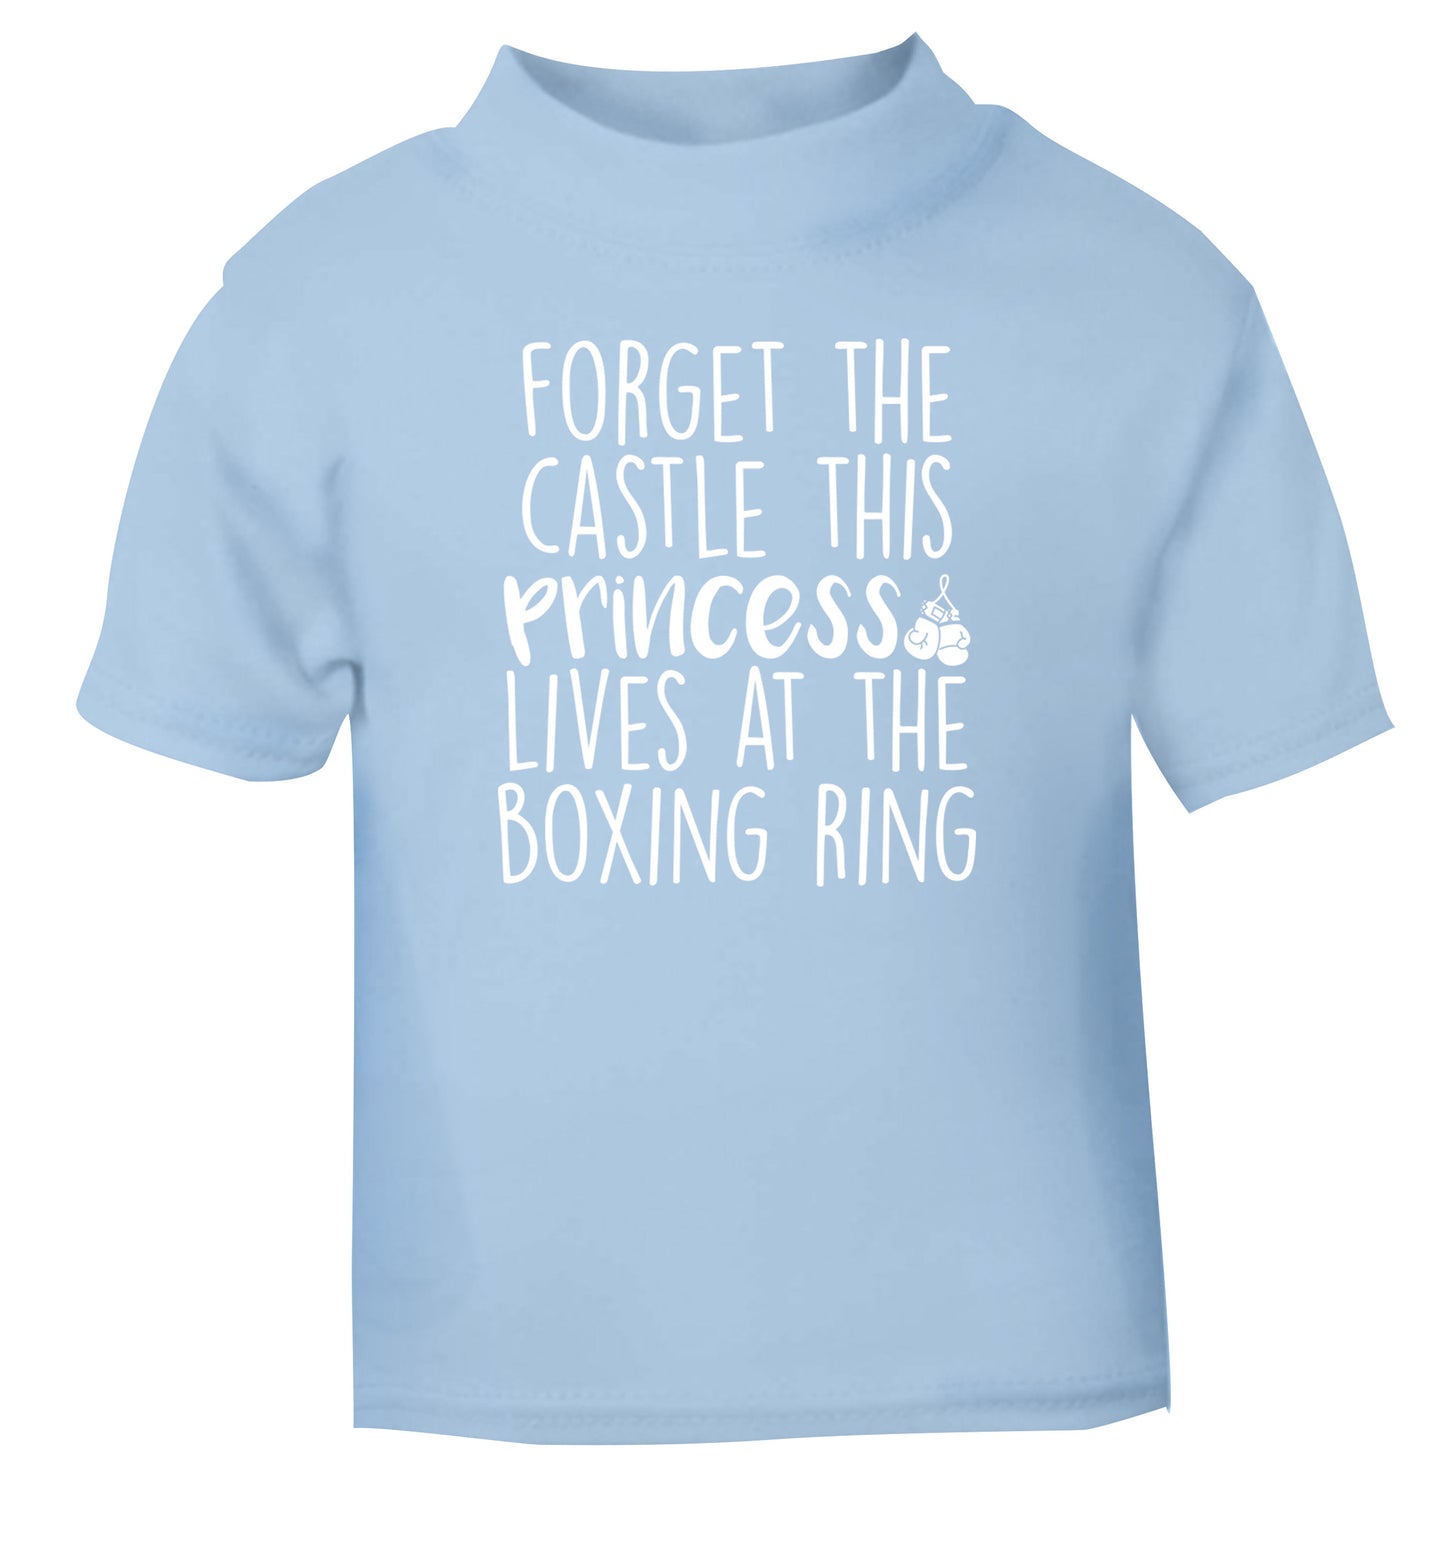 Forget the castle this princess lives at the boxing ring light blue Baby Toddler Tshirt 2 Years